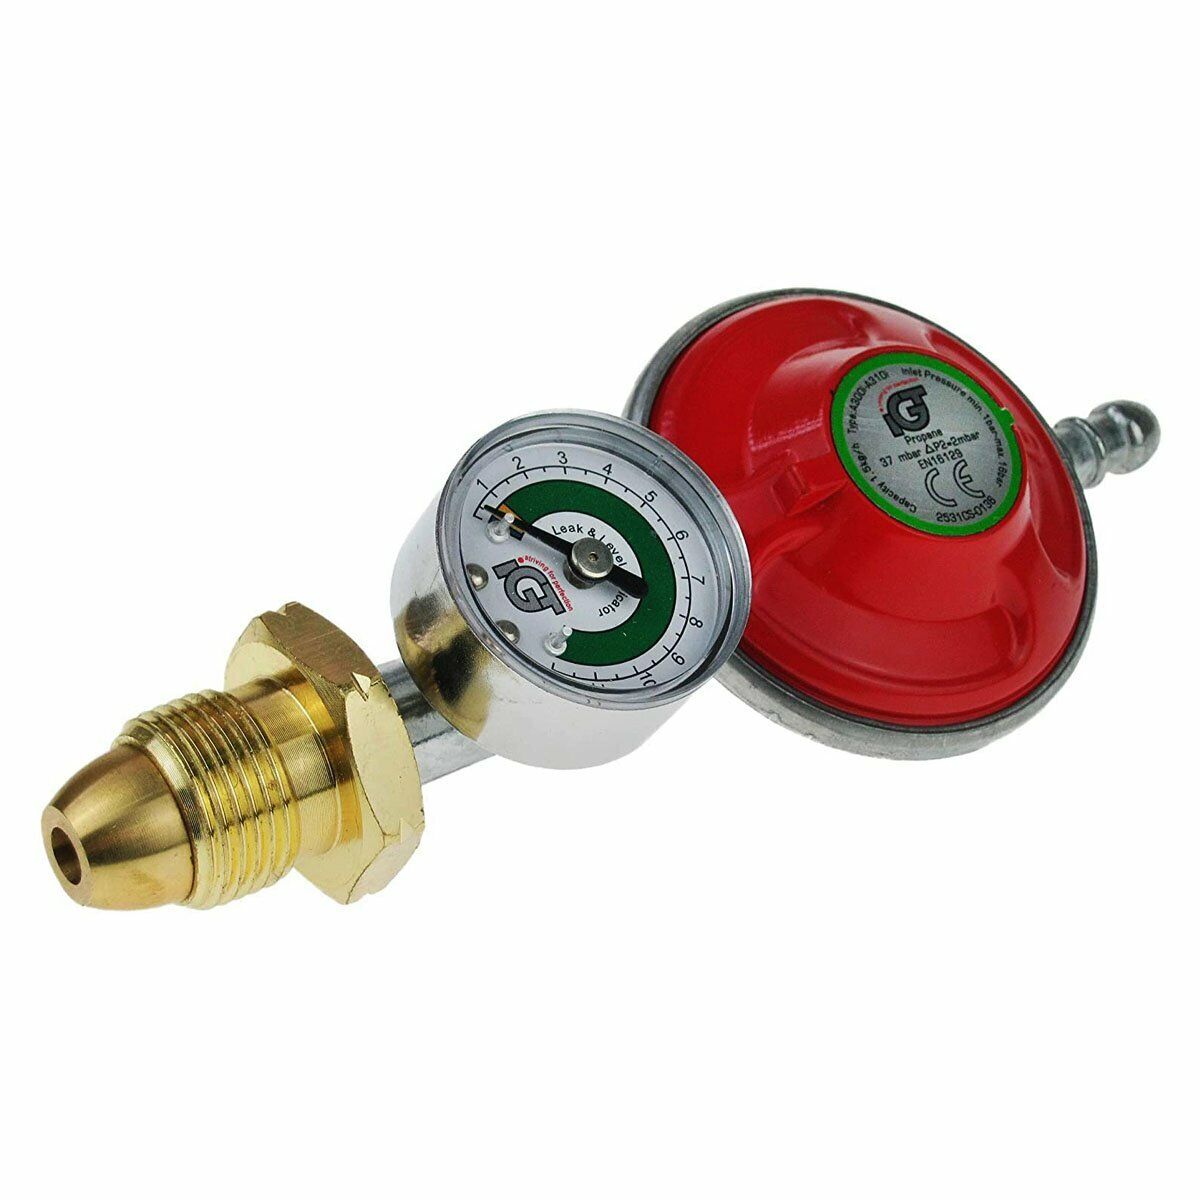 37mb Propane Gas Bottle Regulator Pressure Max 47% OFF With Fits Gauge Calor OFFicial store